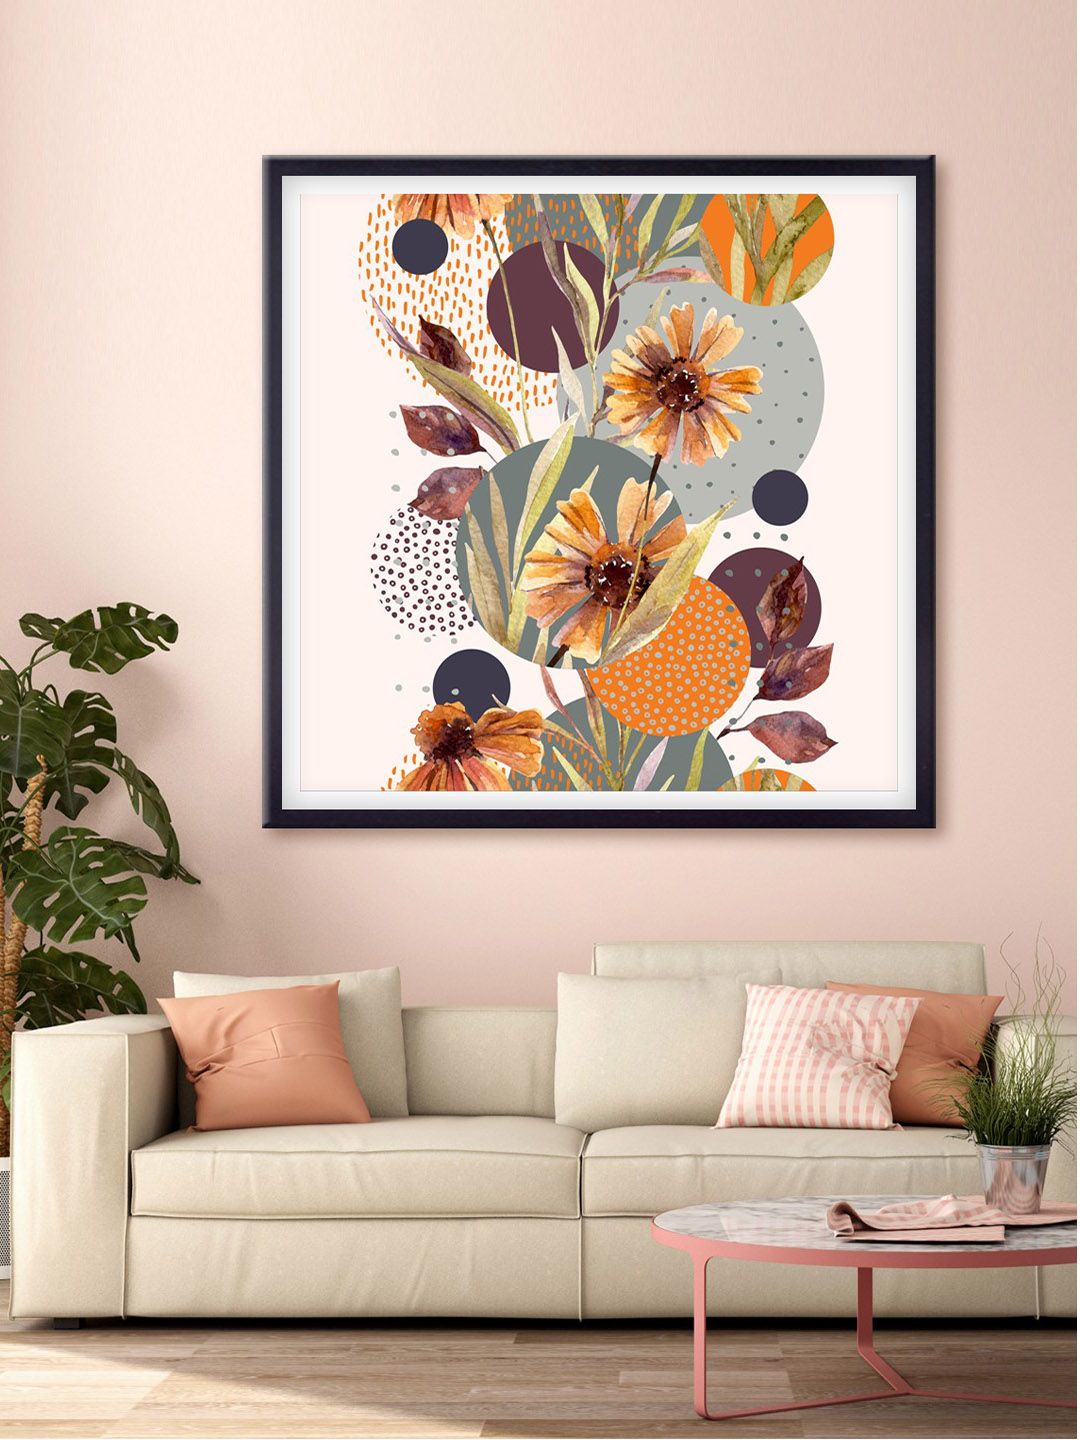 999Store Off-White & Grey Flower And Leaves Printed Canvas Wall Art Price in India